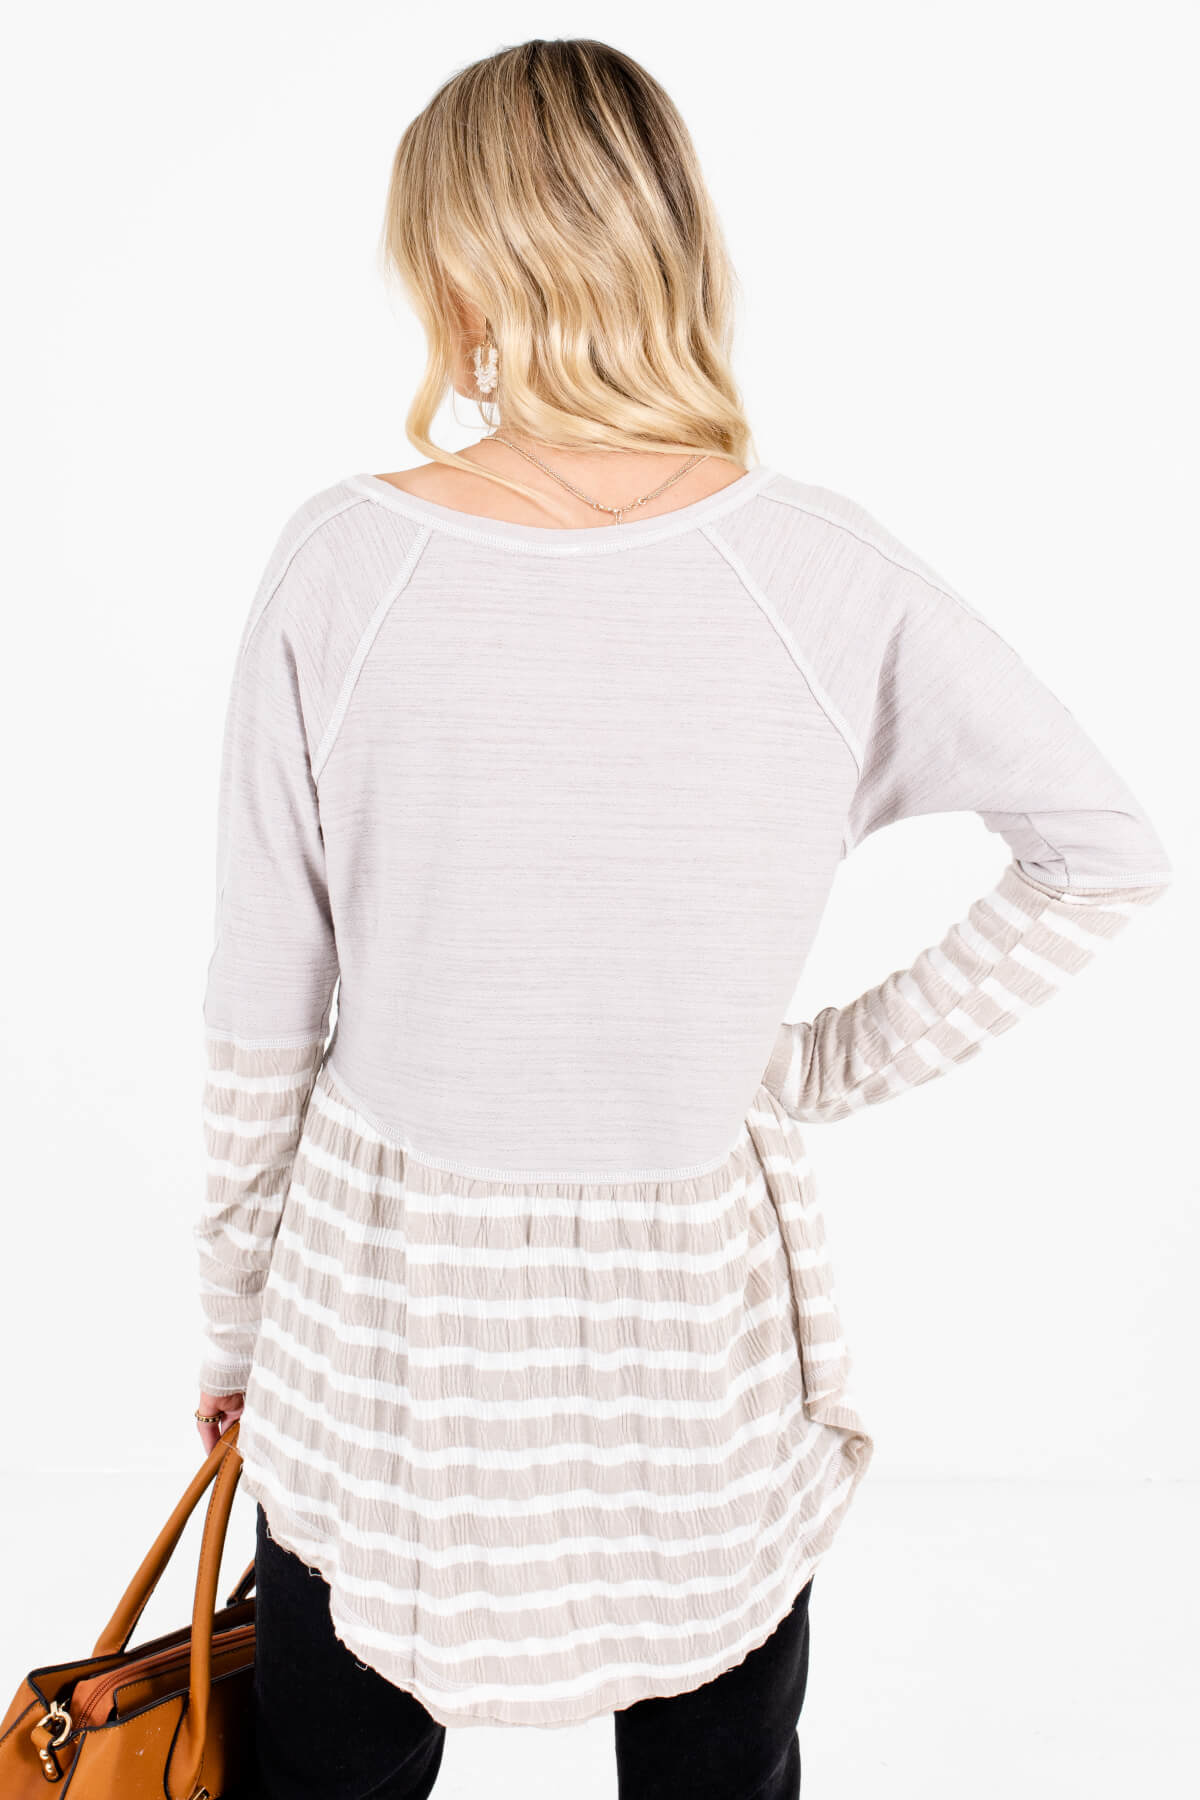 Women's Taupe Brown Long Sleeve Boutique Tops